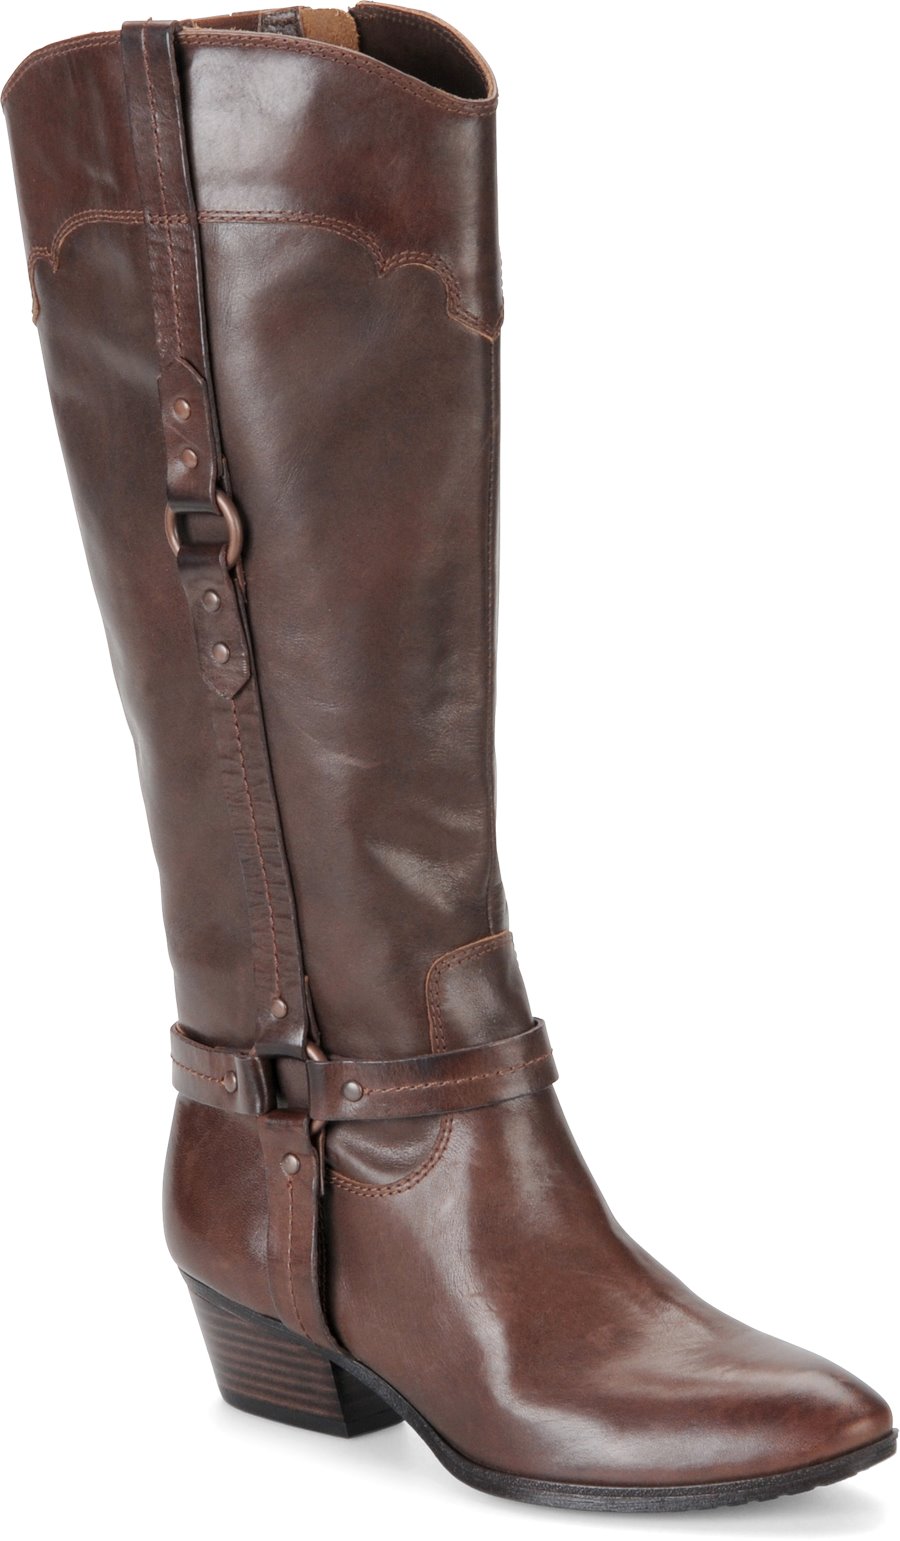 Sofft Porter in Chocolate - Sofft Womens Boots on Shoeline.com